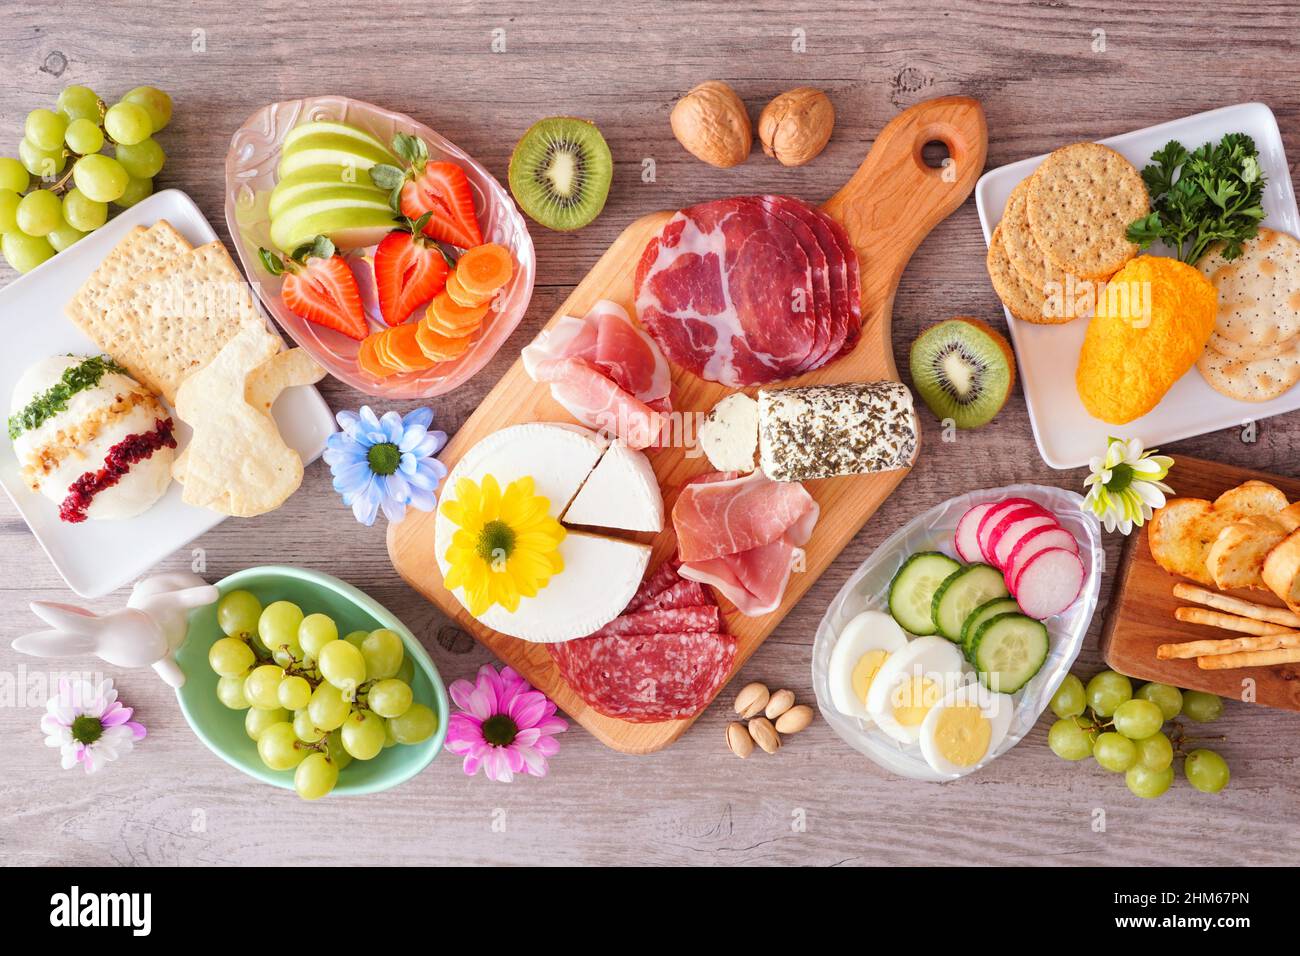 Spring or Easter theme charcuterie table scene against a wood background. Variety of cheese, meat, fruit and vegetable appetizers. Top view. Stock Photo